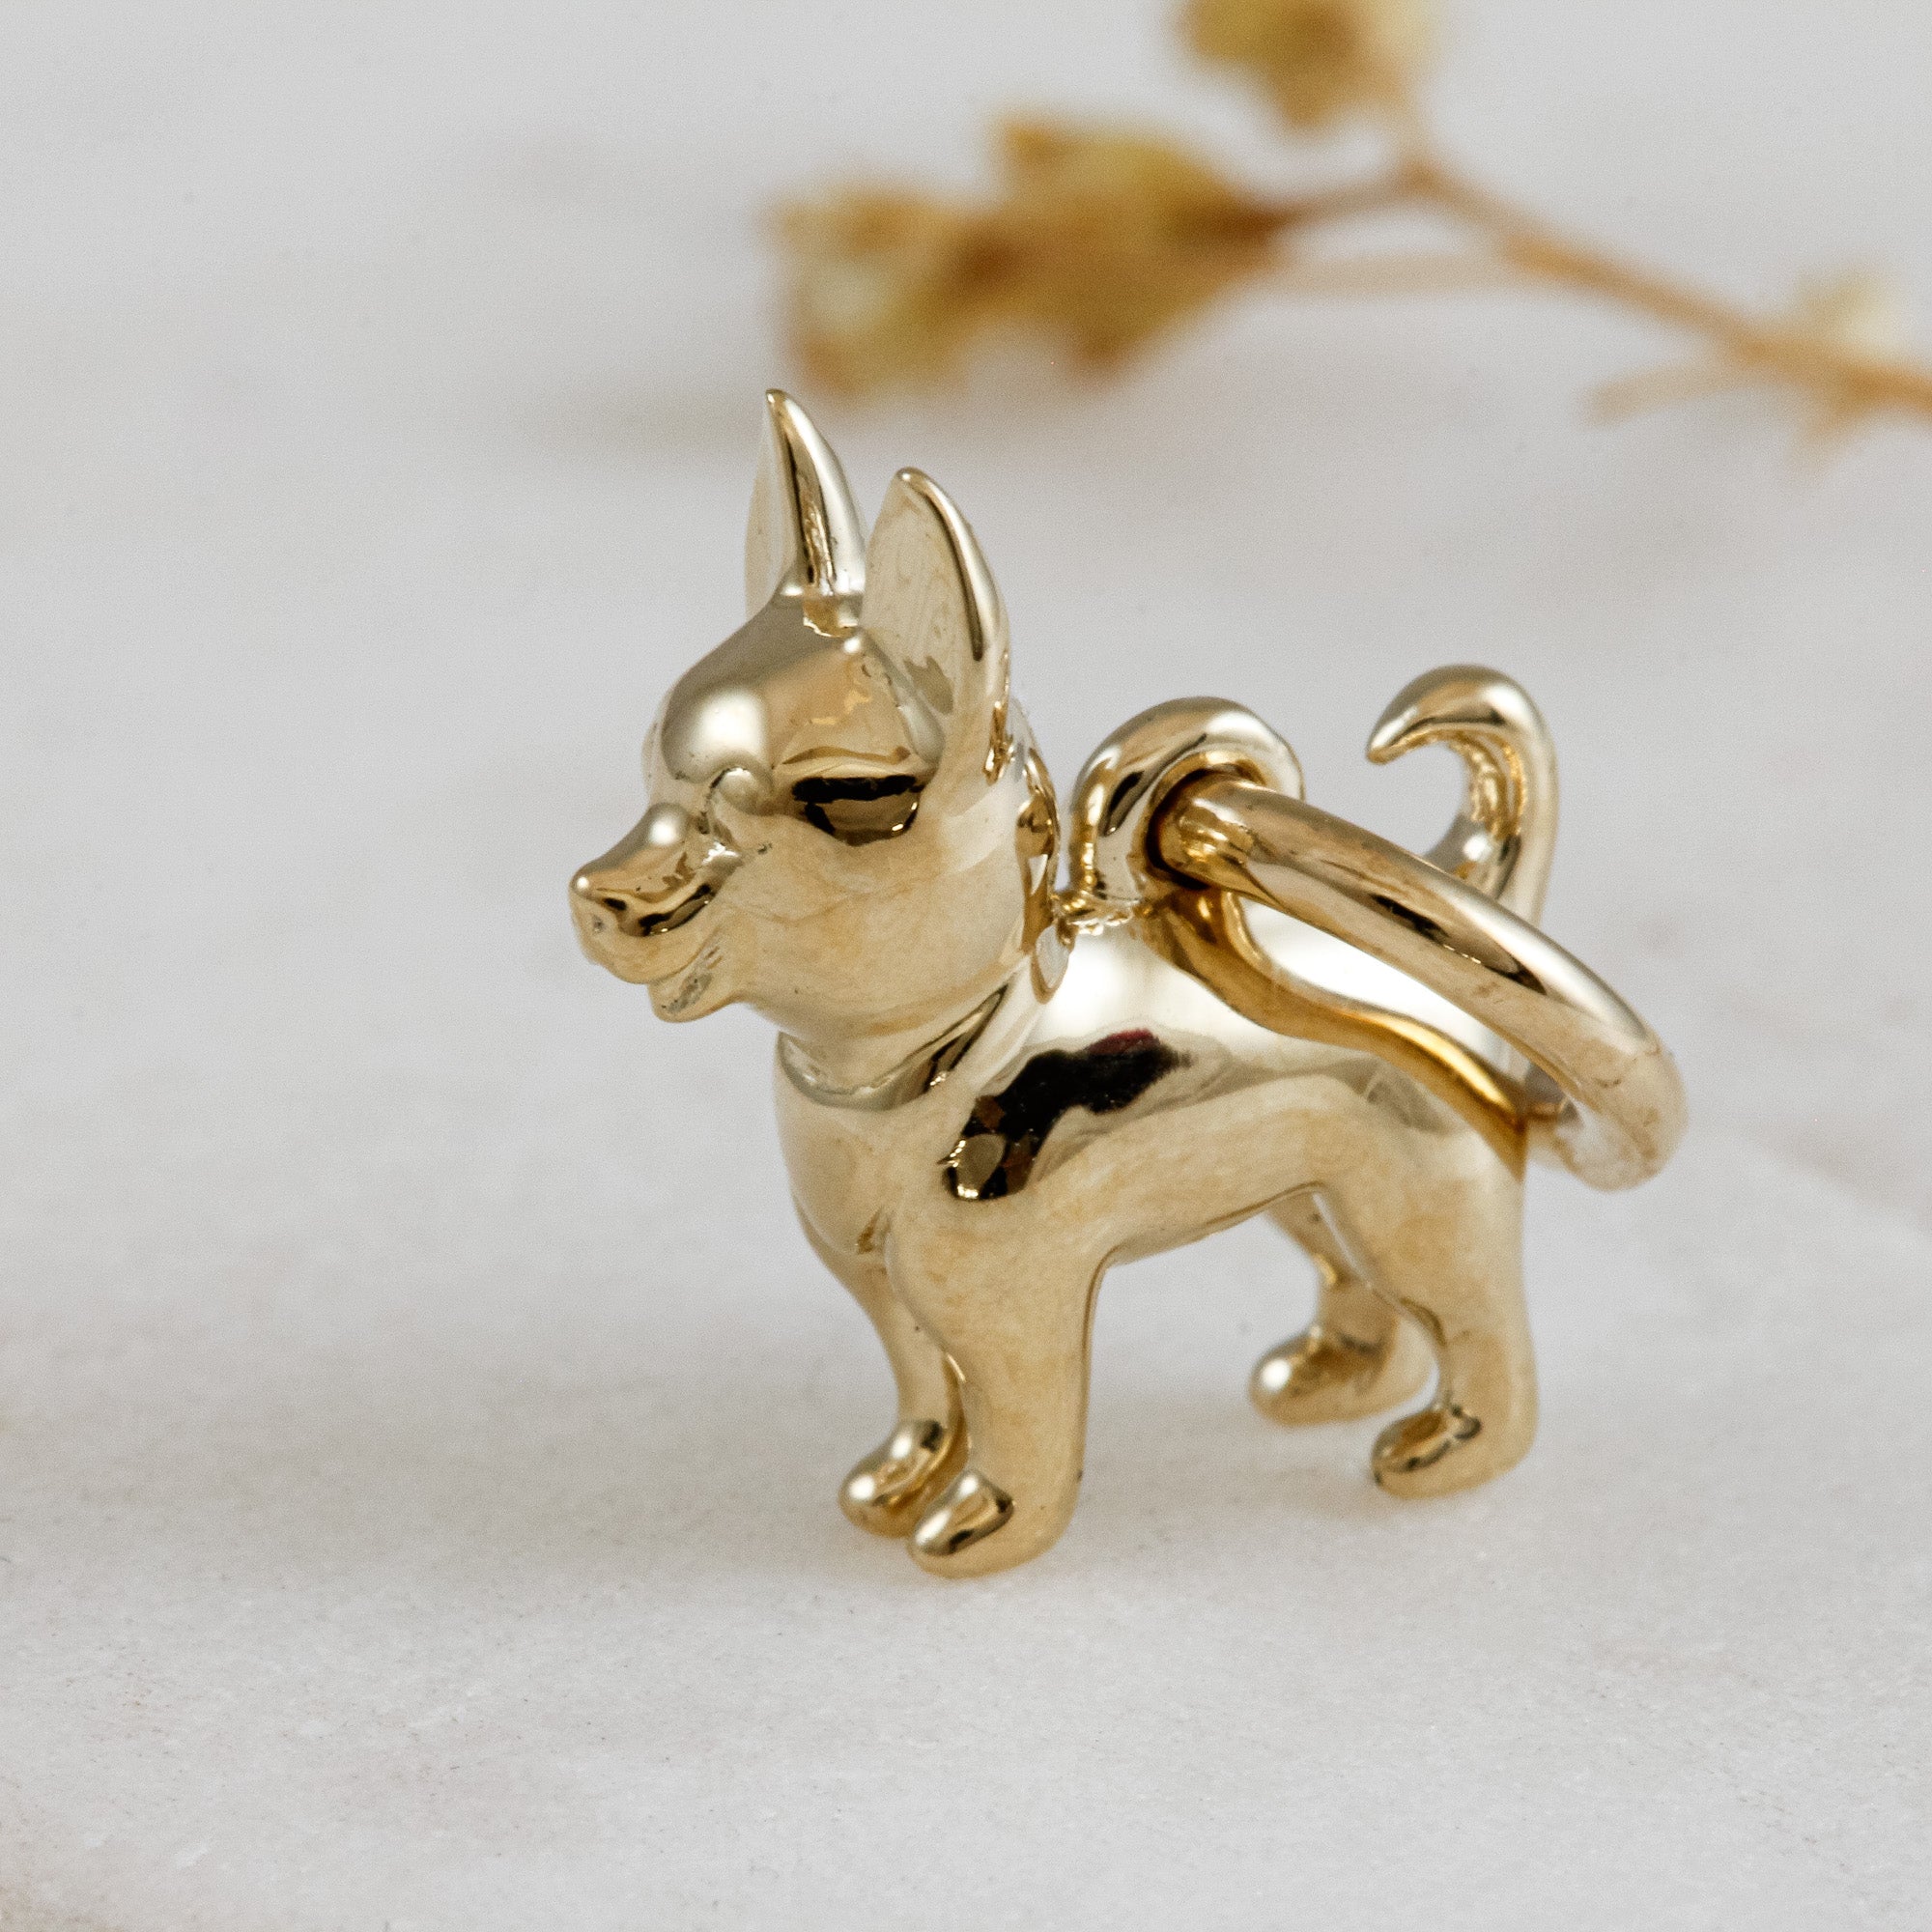 chihuahua solid gold dog charm for a necklace or bracelet